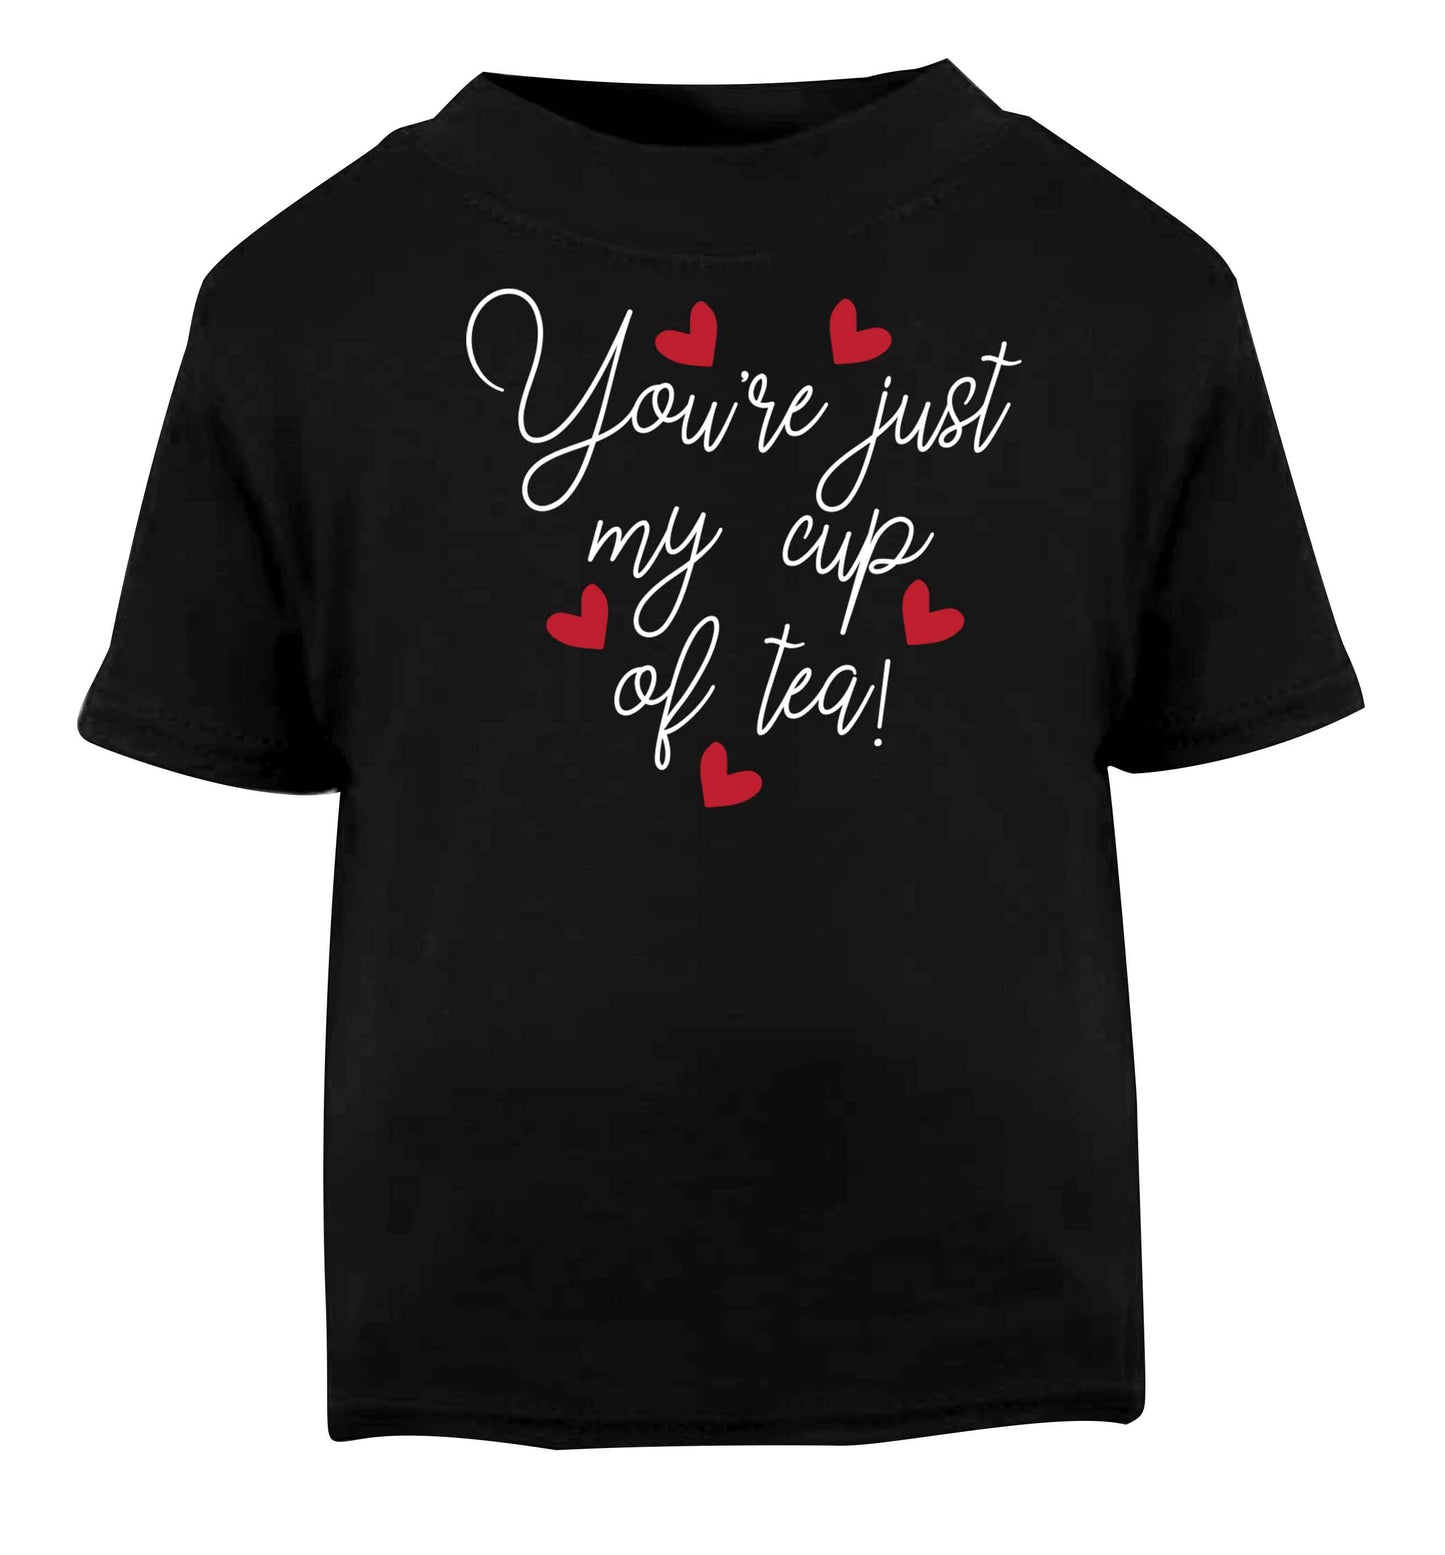 You're just my cup of tea Black baby toddler Tshirt 2 years